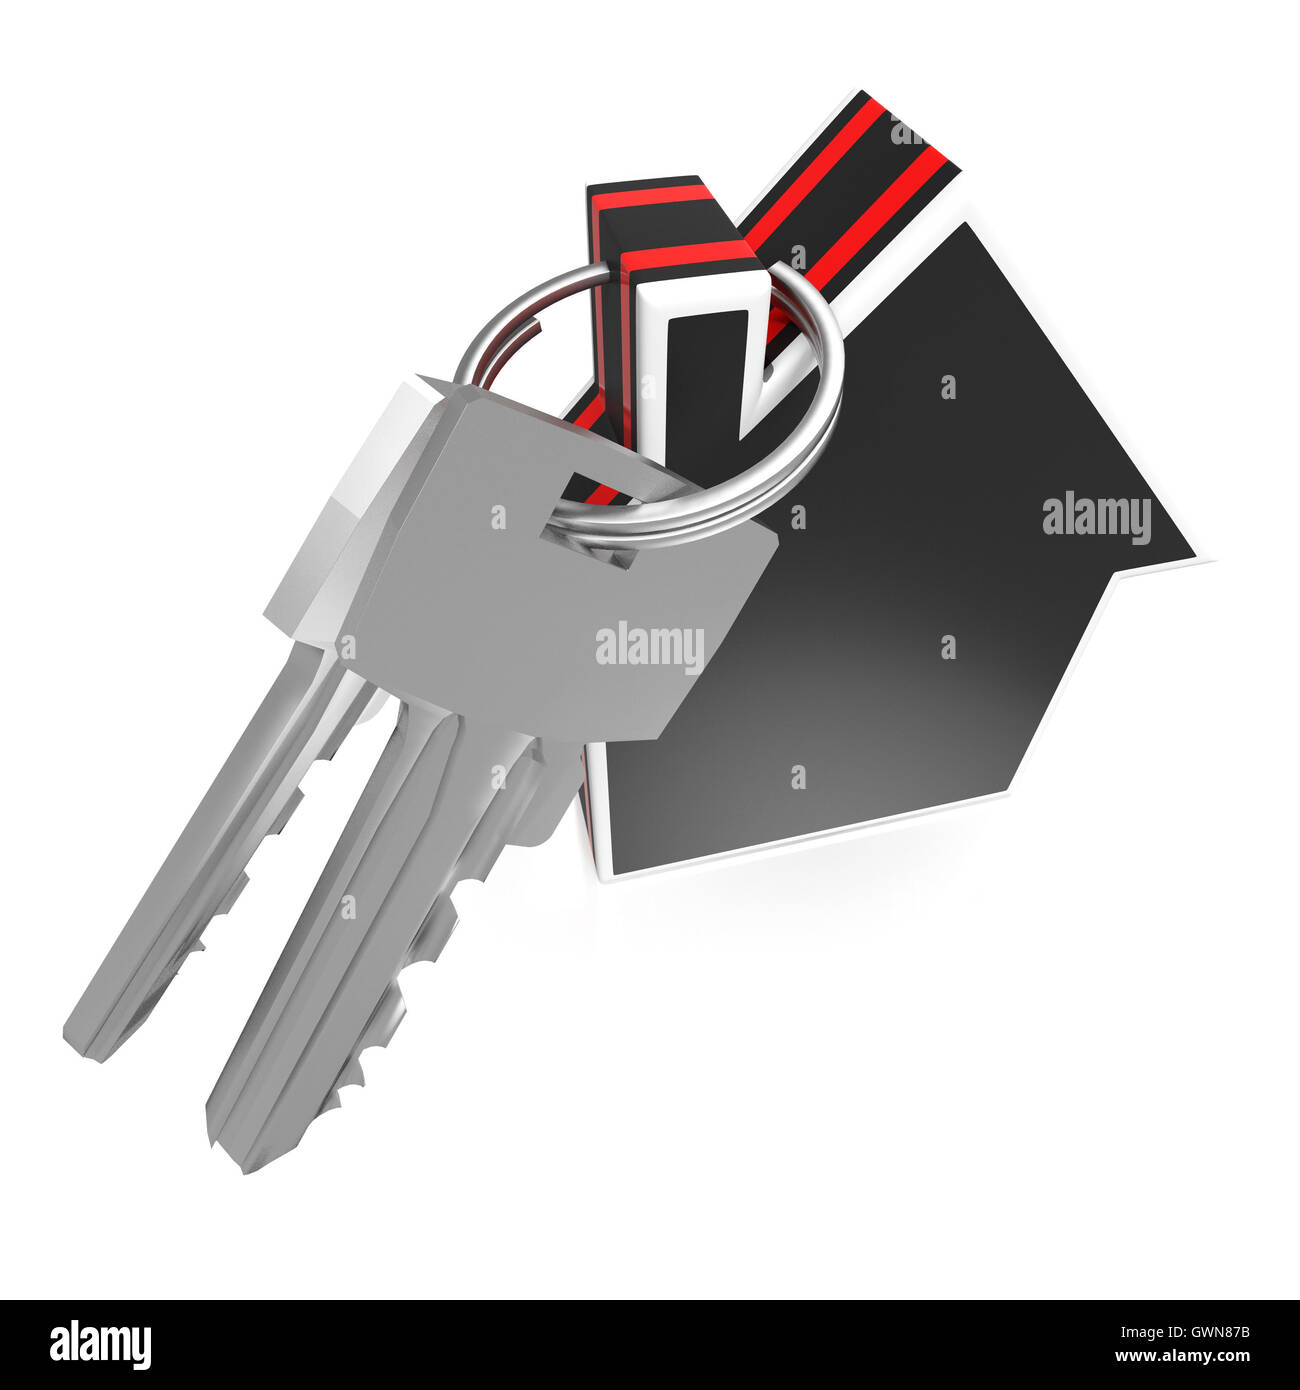 Keys And House Showing Home Security Stock Photo